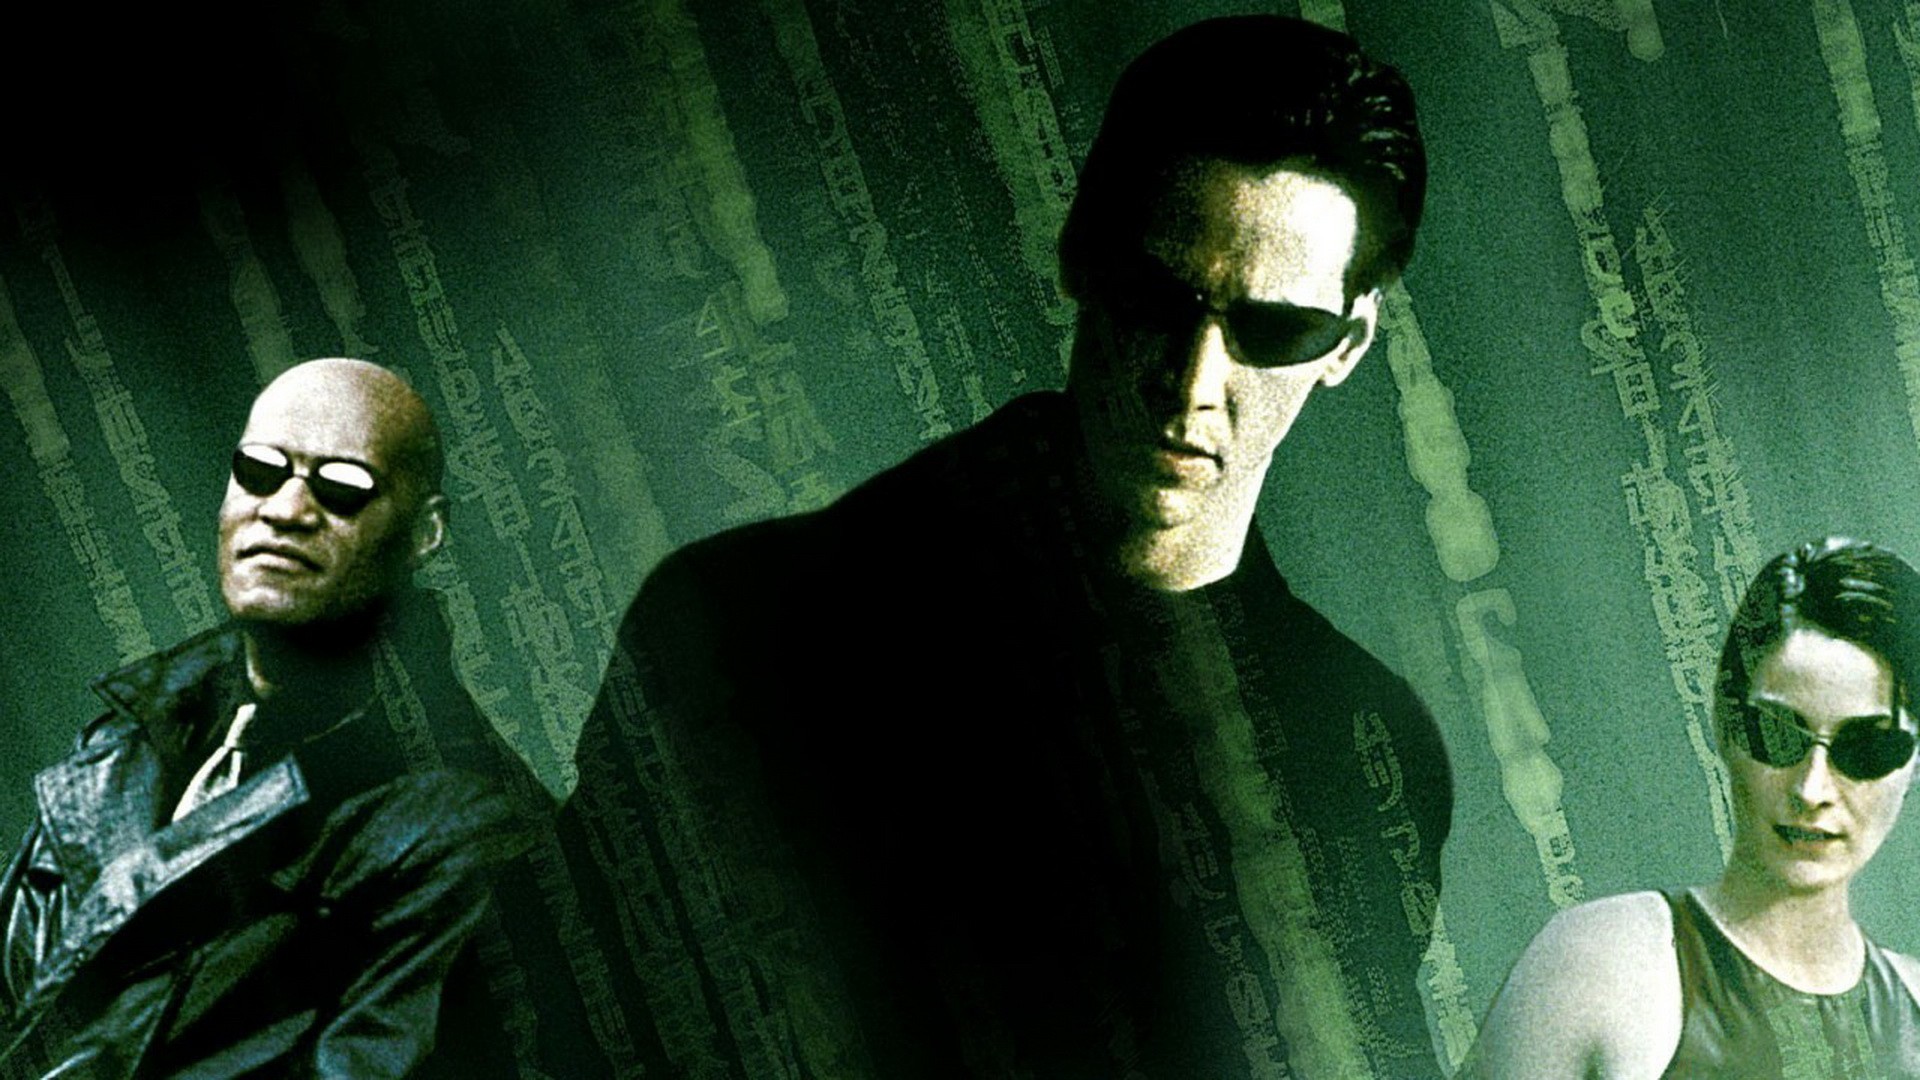 General 1920x1080 The Matrix movies Neo Keanu Reeves Morpheus Carrie-Anne Moss Trinity Laurence Fishburne 1999 (Year) sunglasses